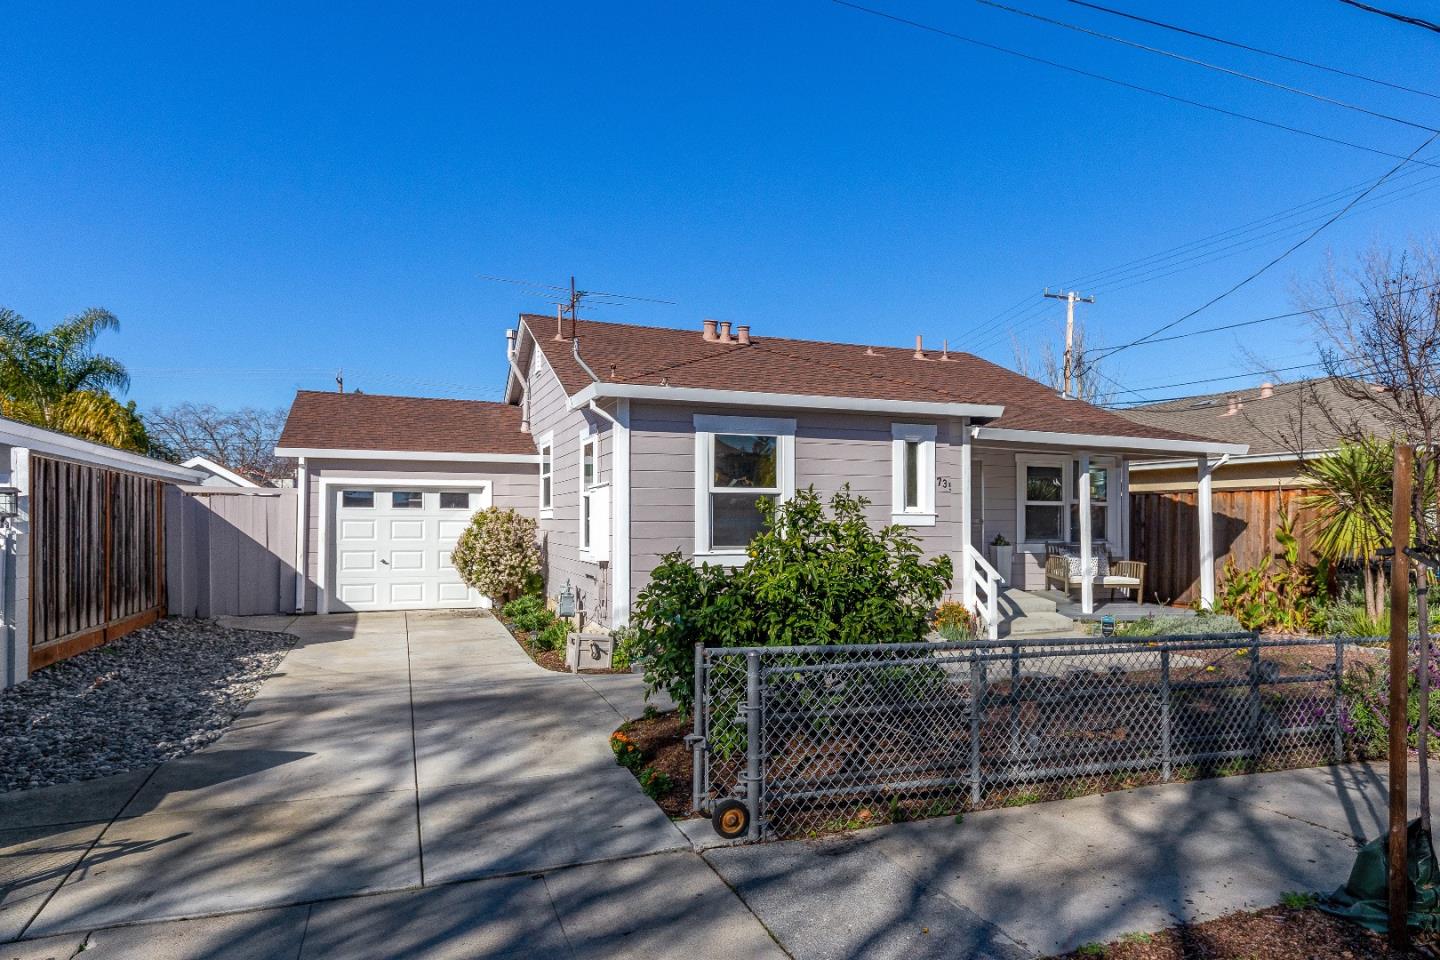 An absolute must see. Well maintained with many new upgrades. This 2 bed 1 bath offers a large newly landscaped backyard.  Walk to downtown Redwood City restaurants, summer concert series, theatre and shopping. Move in ready.